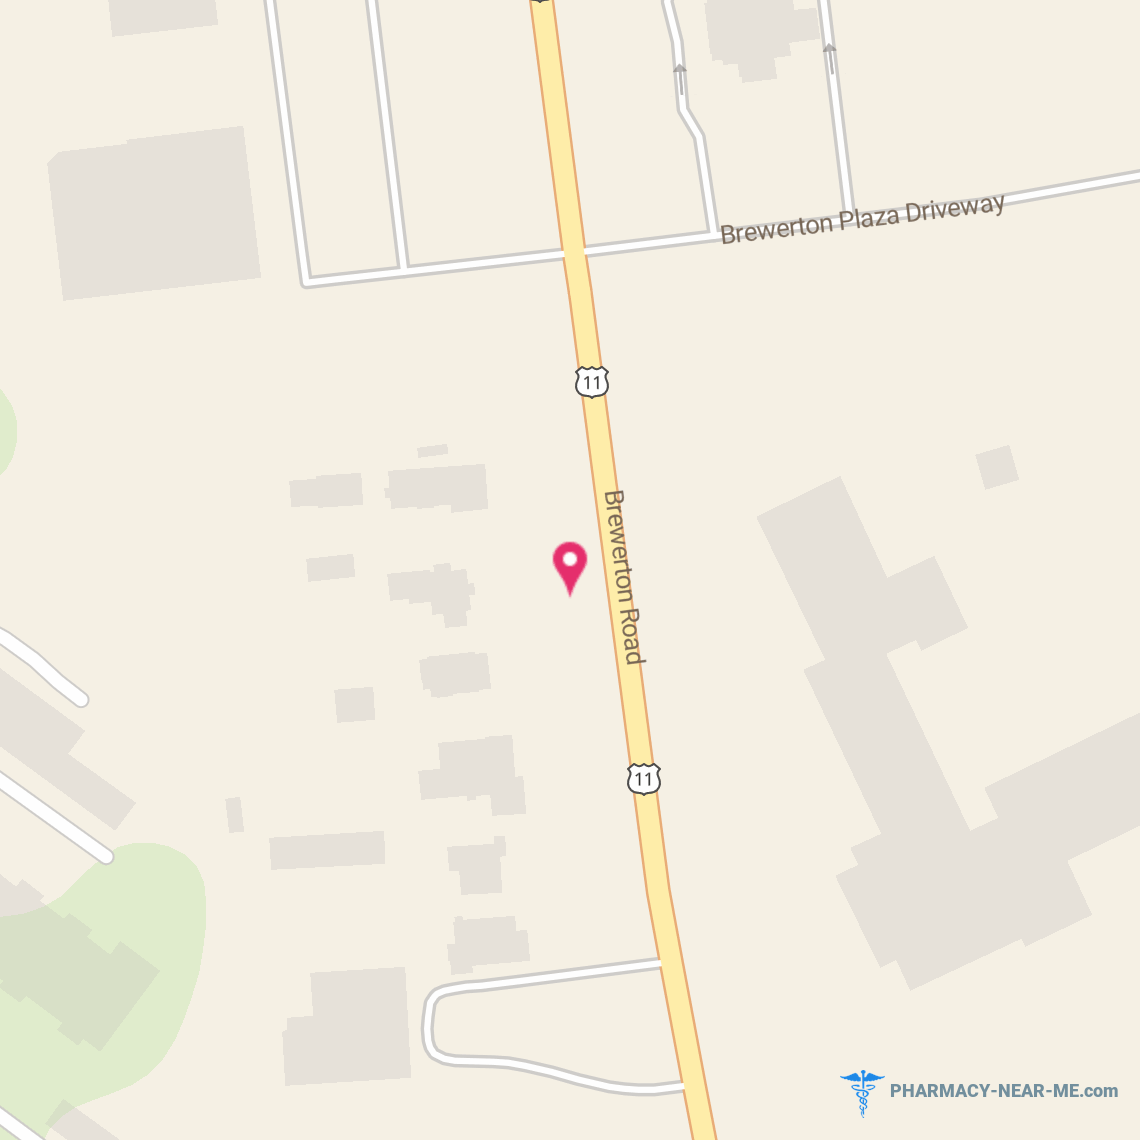 KINNEY DRUGS #32 - Pharmacy Hours, Phone, Reviews & Information: 9543 US Route 11, Brewerton, New York 13029, United States